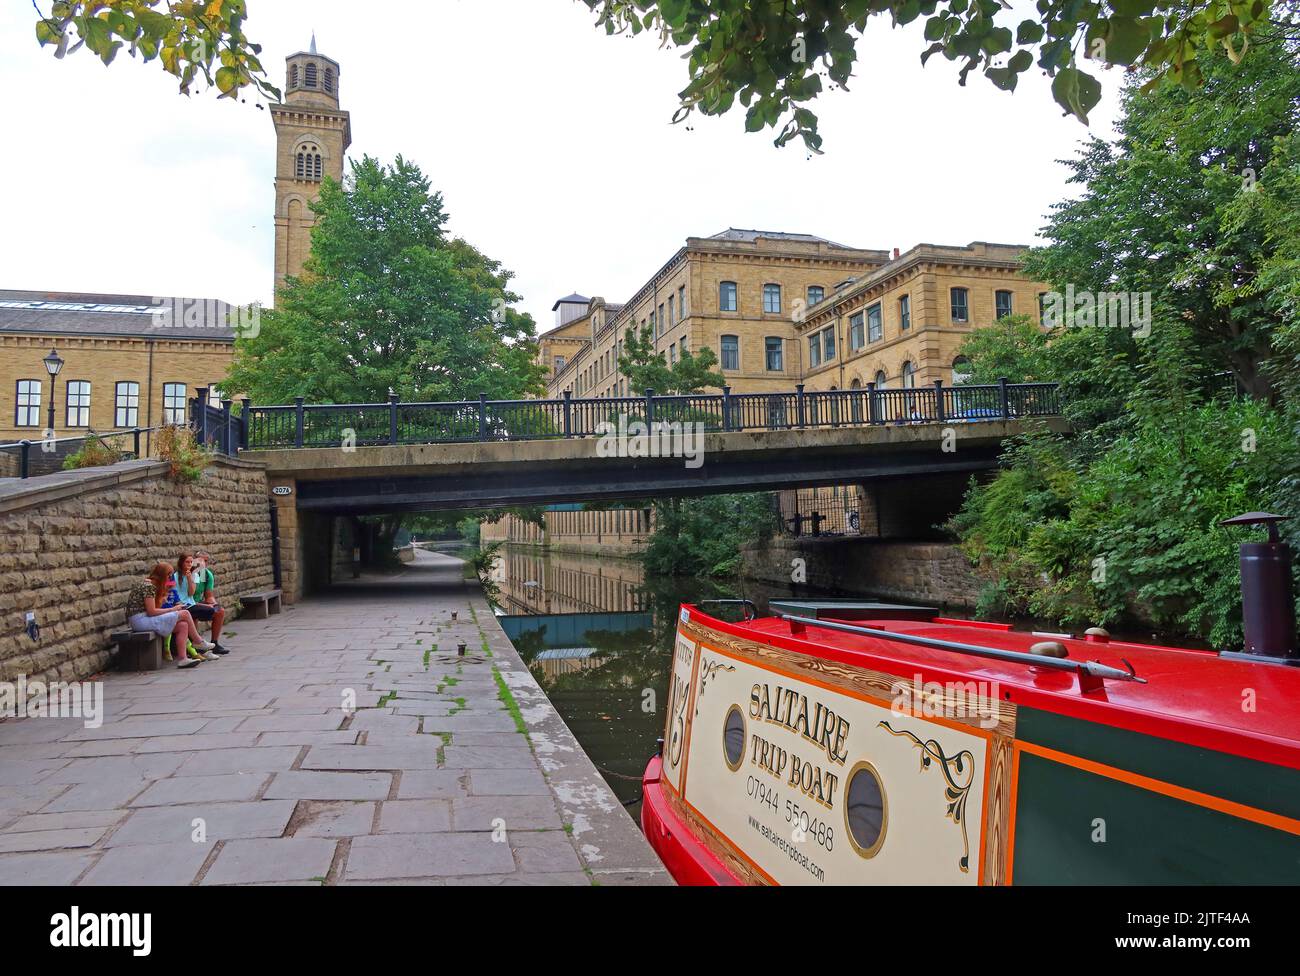 Titus No3 Saltaire Trip Boat, Leeds Liverpool Canal, Wuth Mills at Saltaire, Shipley, West Yorkshire, England, Vereinigtes Königreich, BD98 8AA Stockfoto